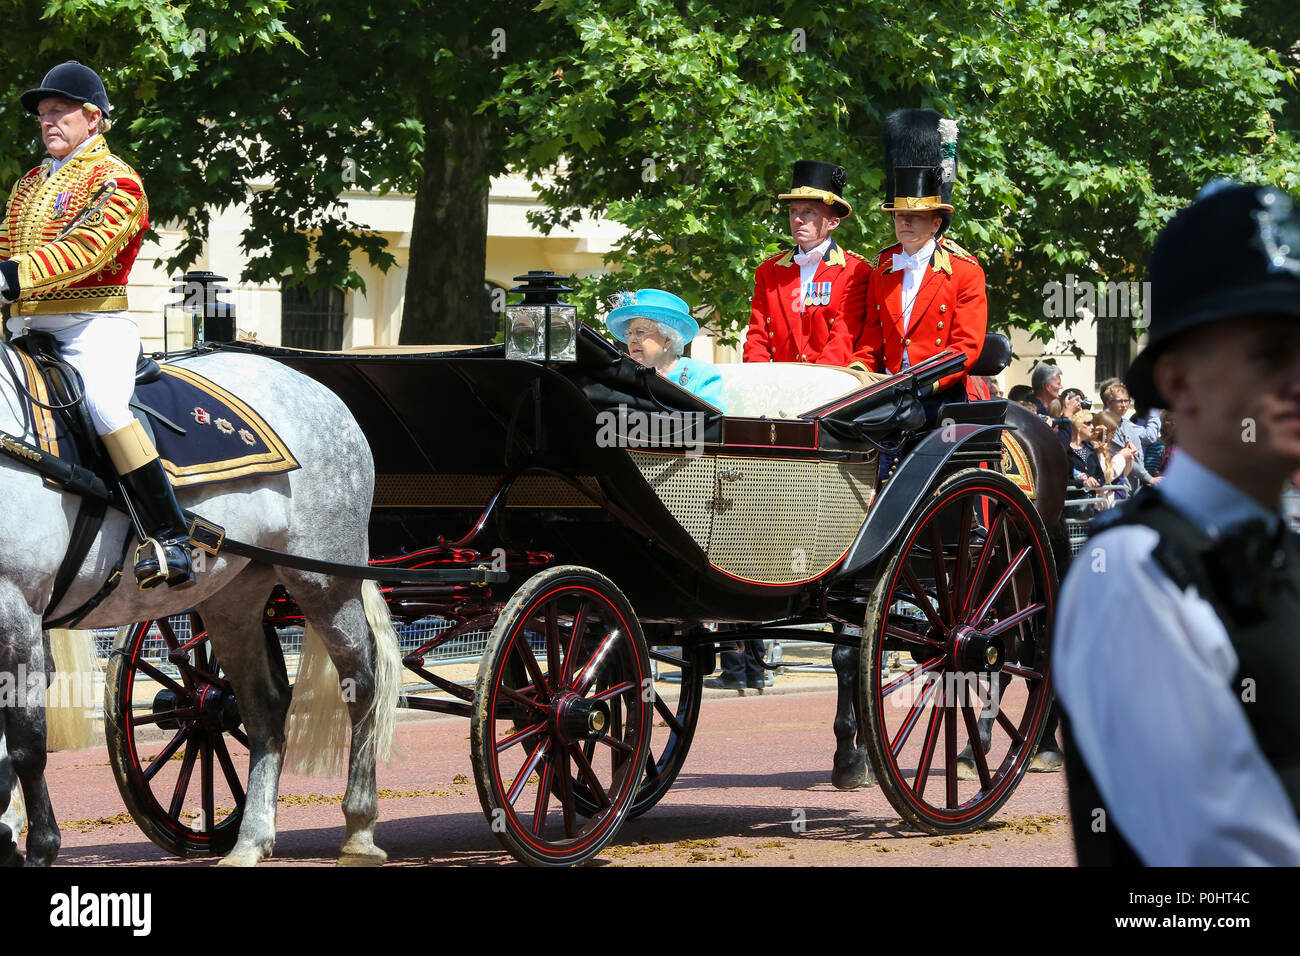 The Mall. London. UK 9 June 2018 - HM The Queen Elizabeth II joined by other members of the Royal Family travel along the Mall in an open top carriage during the Trooping the Colour which marks the 92nd celebration of The Queen's official birthday, during which she inspects troops from the Household Division as they march in Whitehall, before watching a fly-past from the balcony at Buckingham Palace. Credit: Dinendra Haria/Alamy Live News Stock Photo